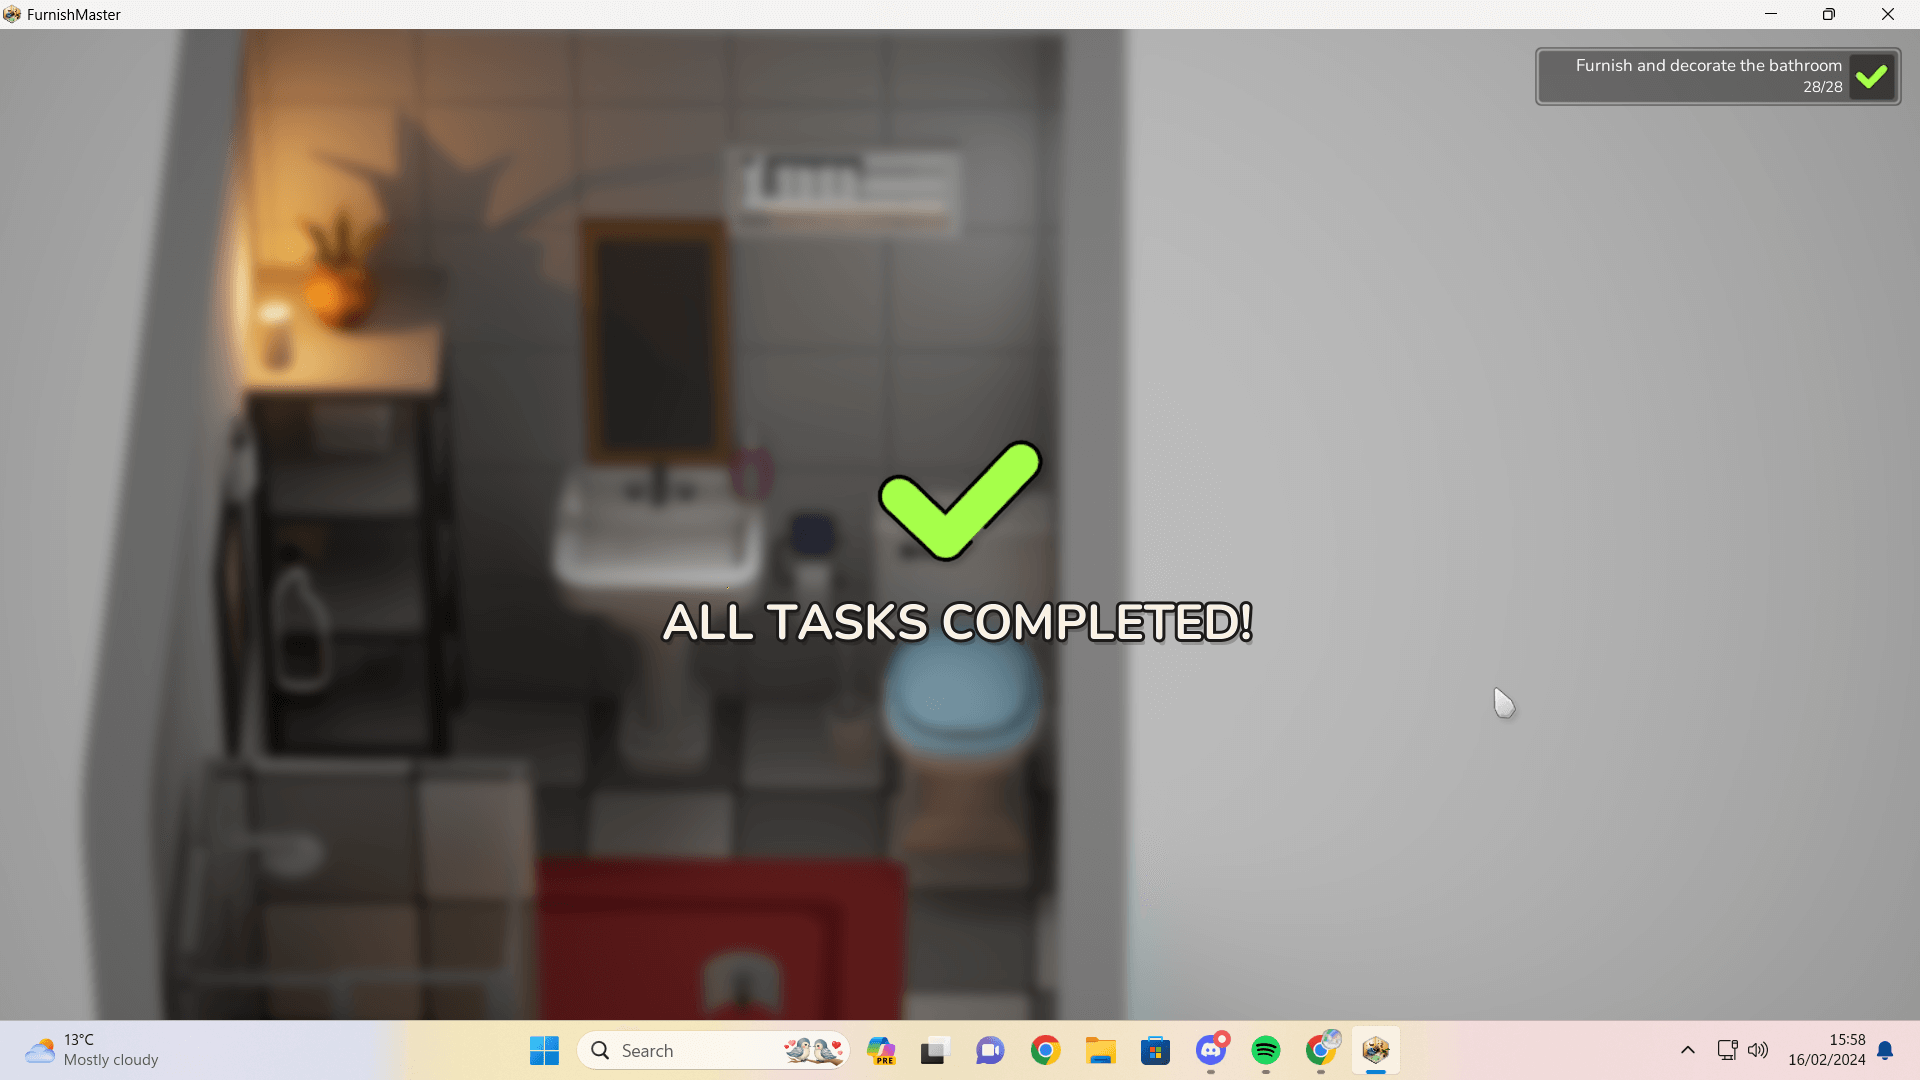 This picture shows "all tasks completed!" in the middle of the screen with a green tick hoovering above. In the background of the picture, you can see a bathroom that has been decorated by the player.